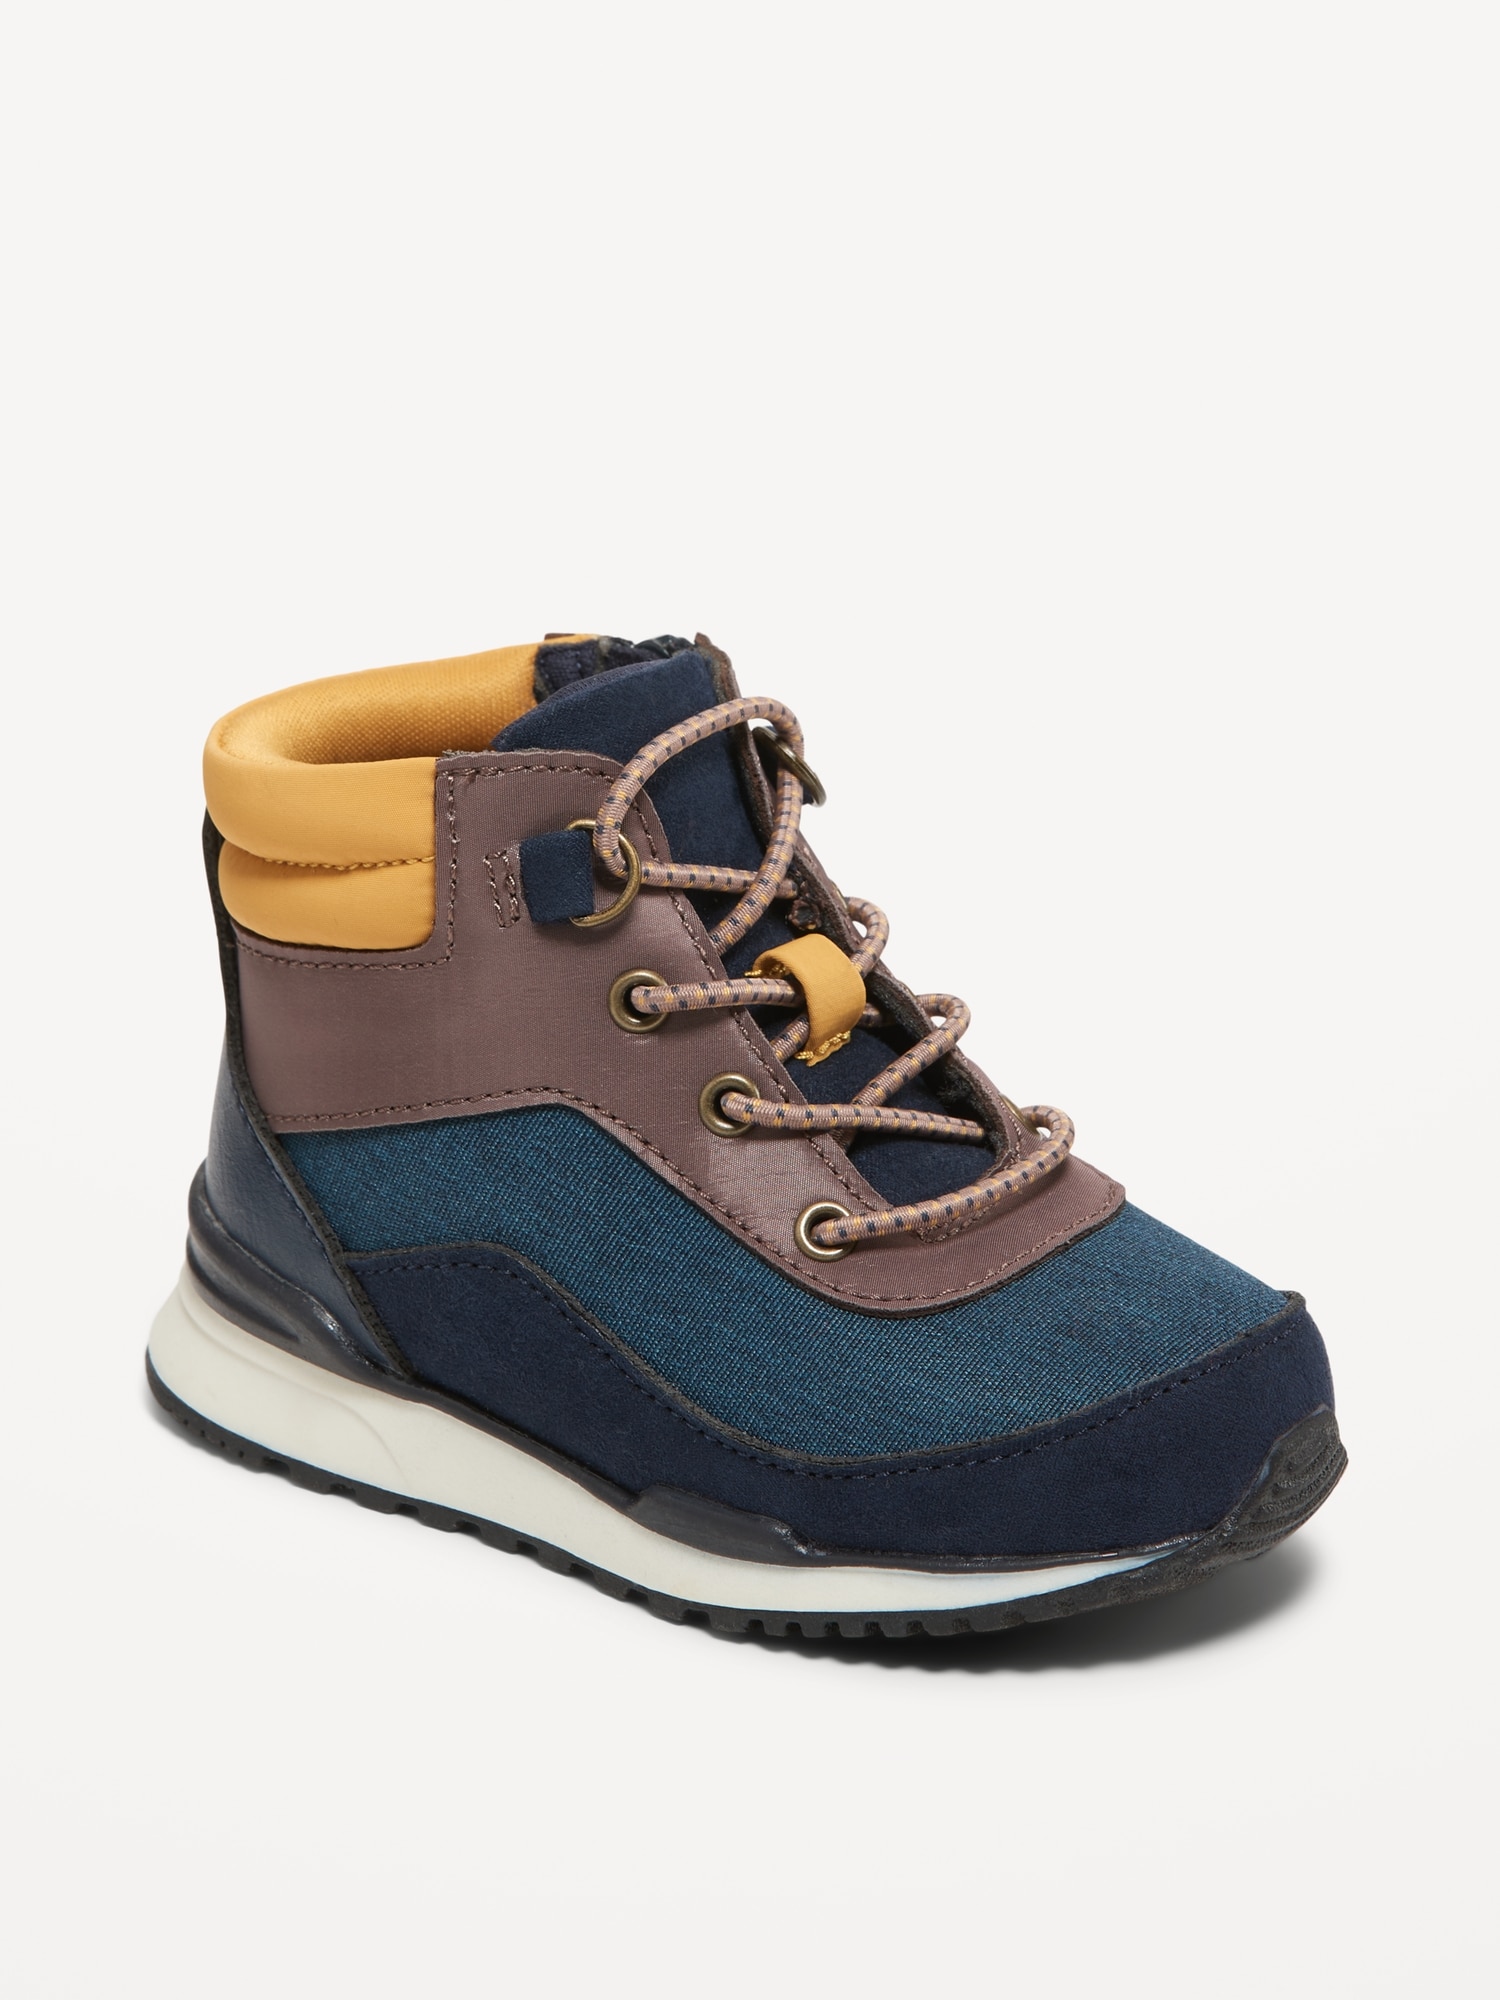 High-Top Side-Zip Sneakers for Toddler Boys